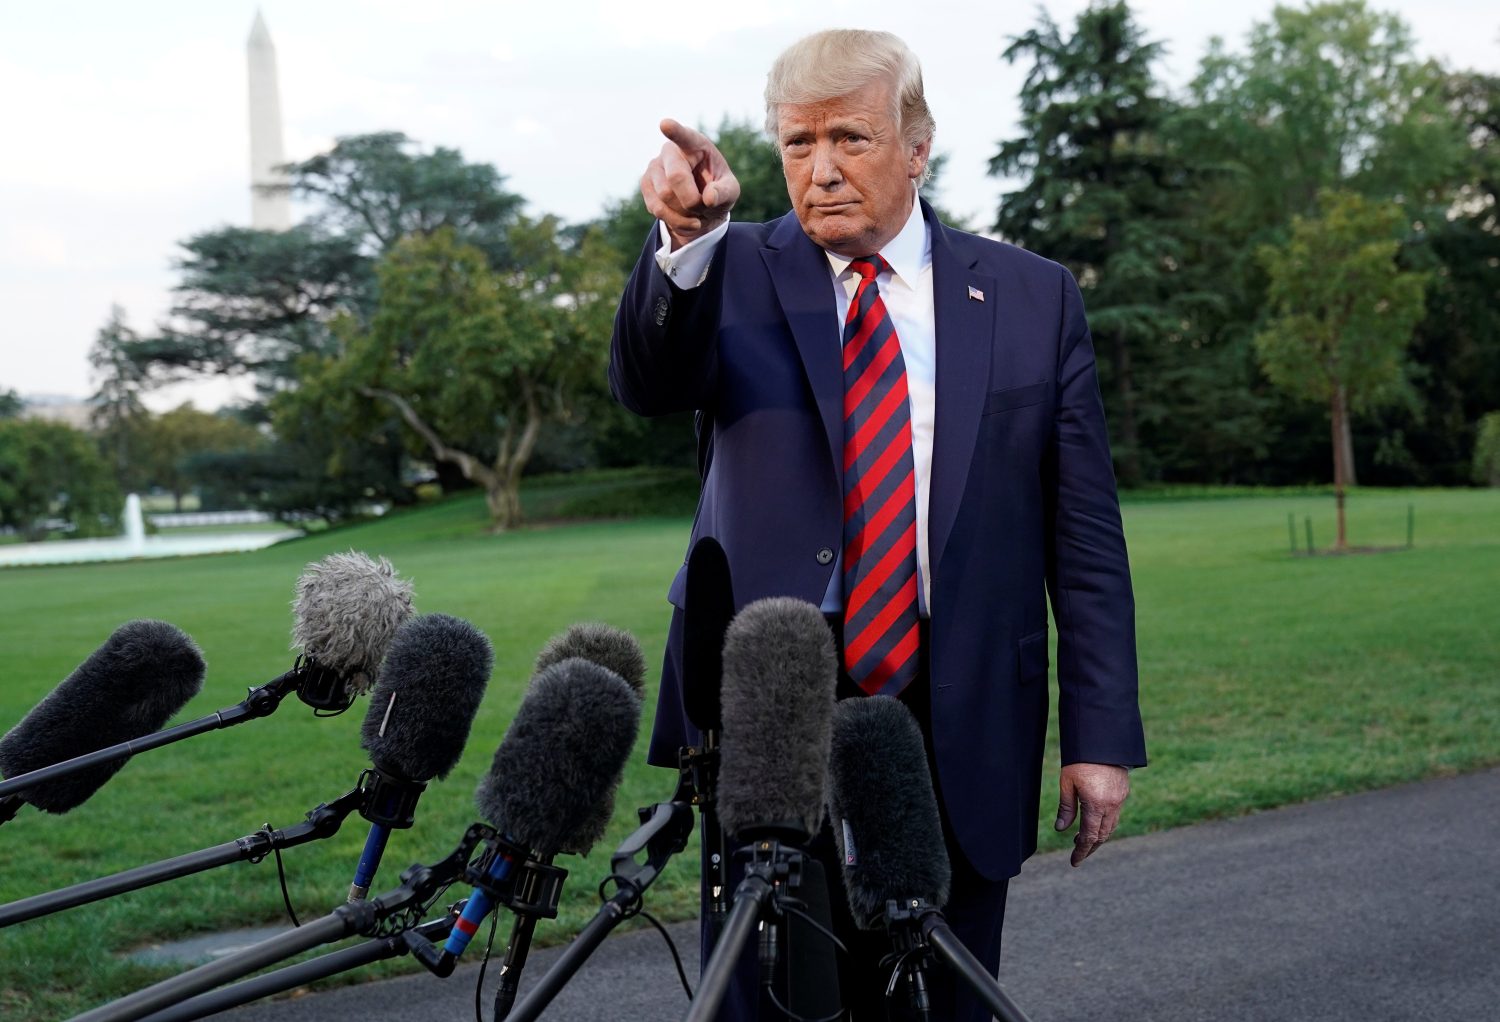 U.S. President Donald Trump speaks to reporters as he departs for Baltimore, Maryland from the South Lawn of the White House in Washington U.S., September 12, 2019. REUTERS/Kevin Lamarque - RC19CC8CBAF0